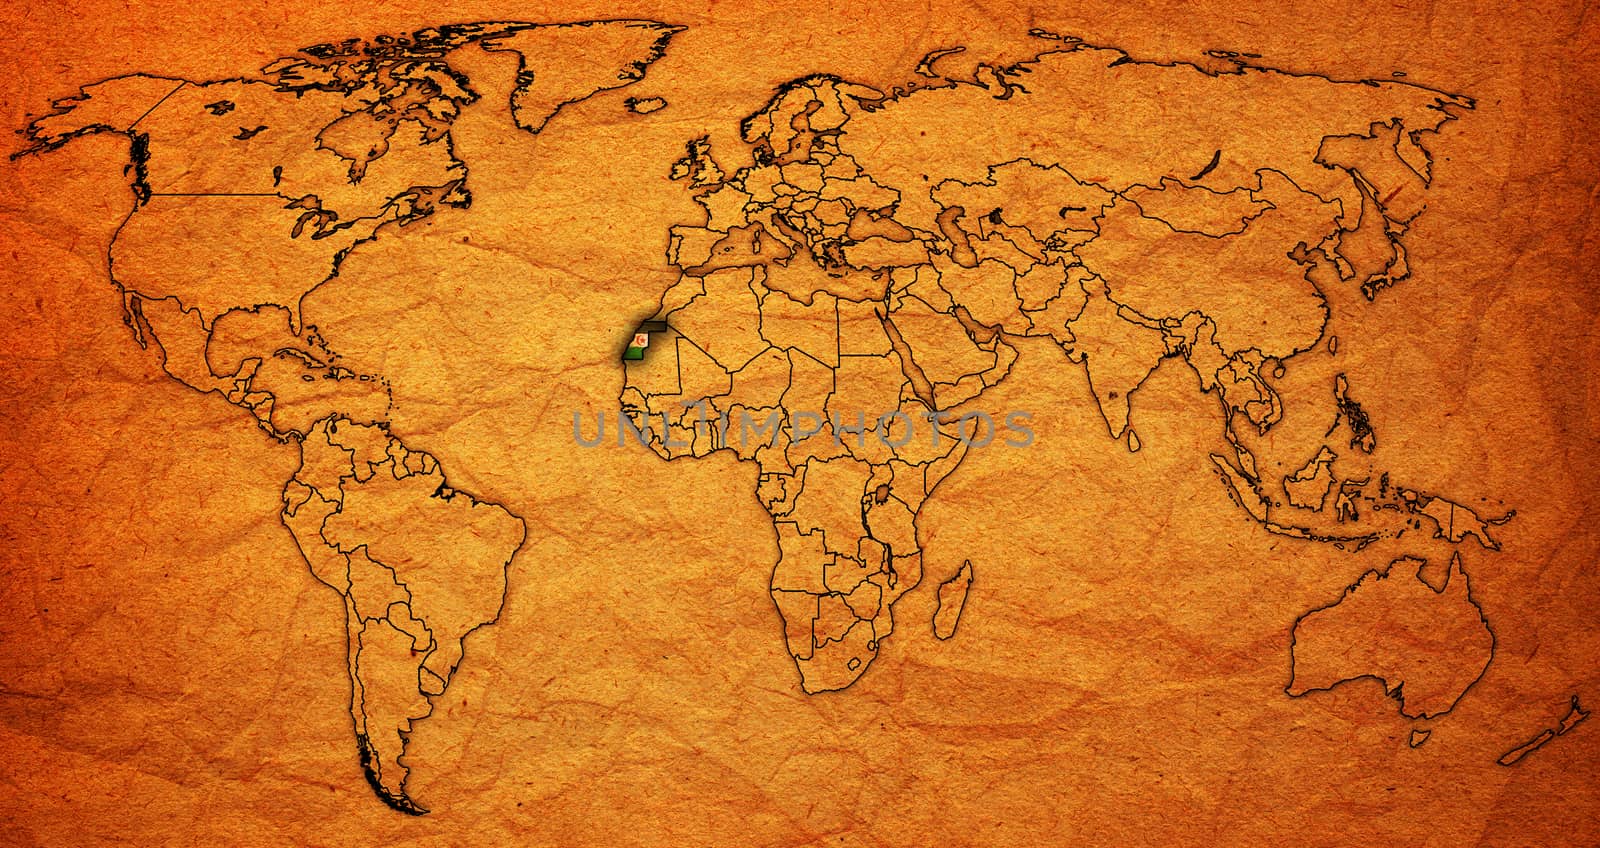 western sahara territory on world map by michal812